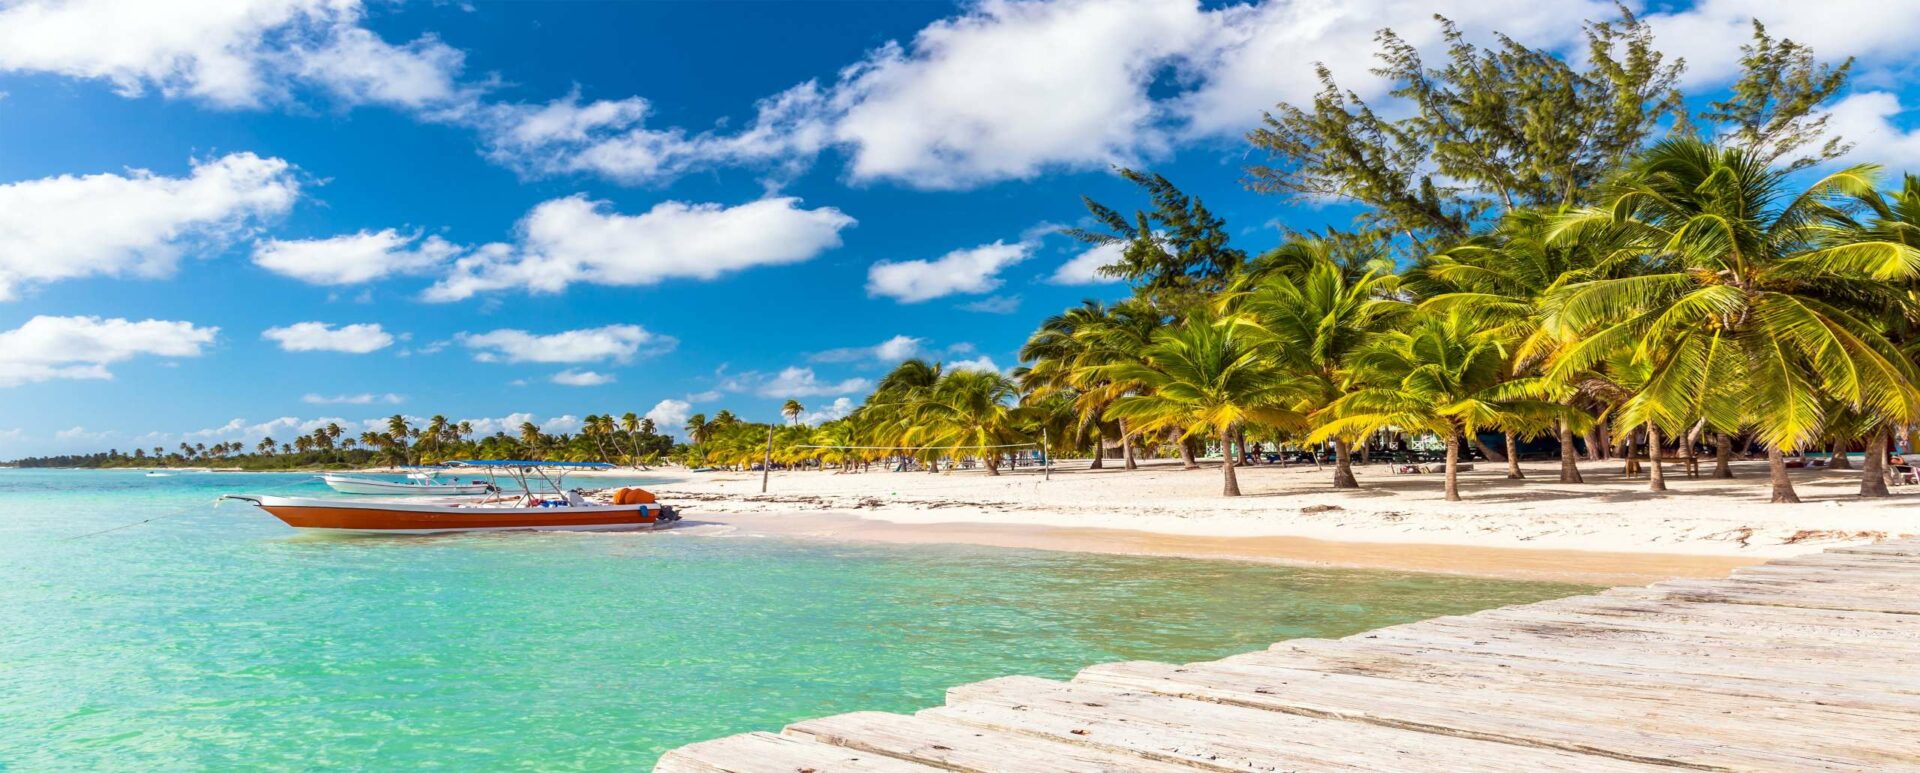 Our must-see places to visit in the Dominican Republic